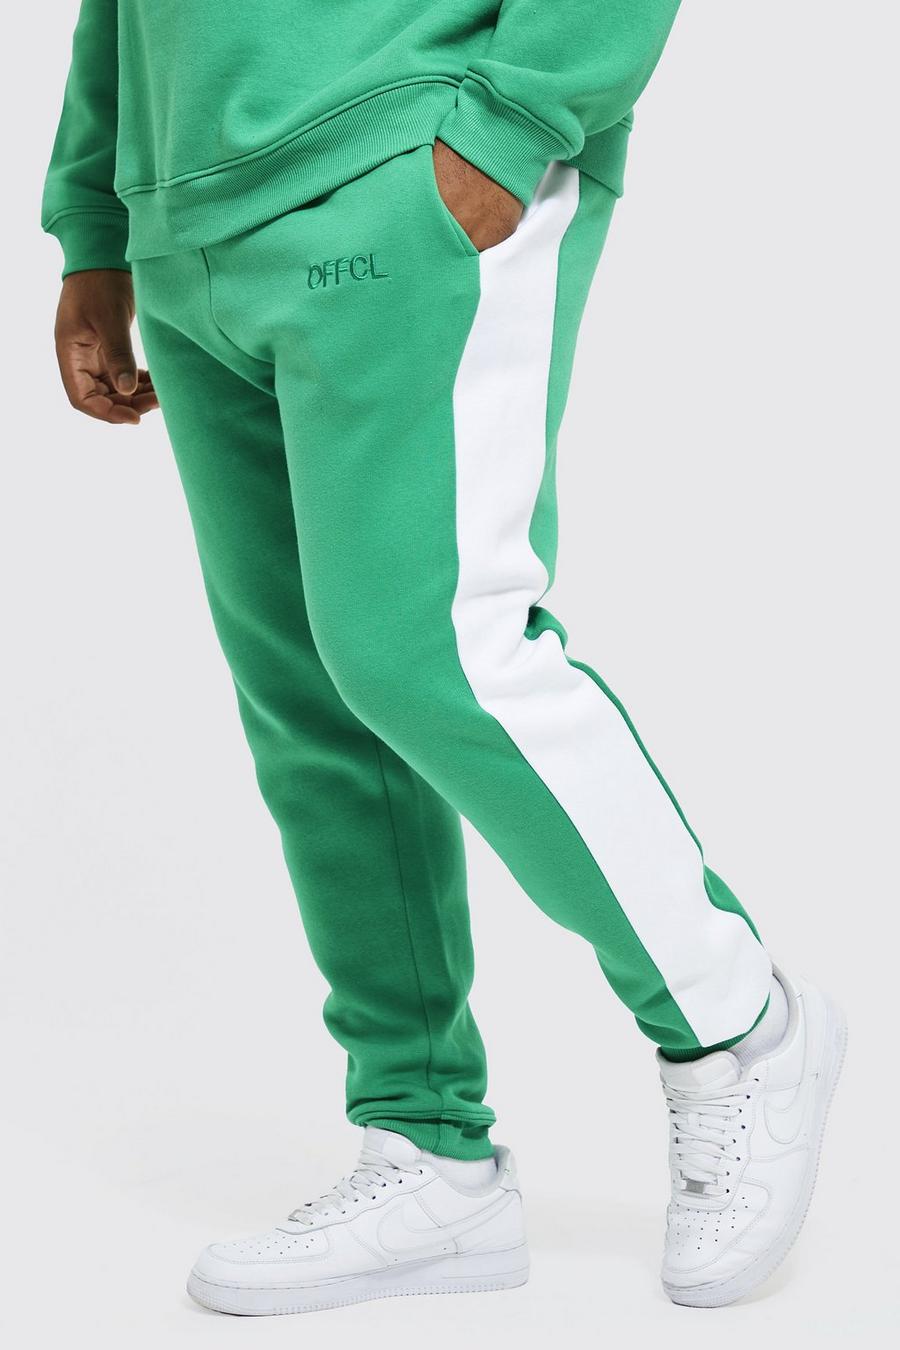 Pantalón deportivo Plus Offcl pitillo con panel lateral, Bright green verde image number 1